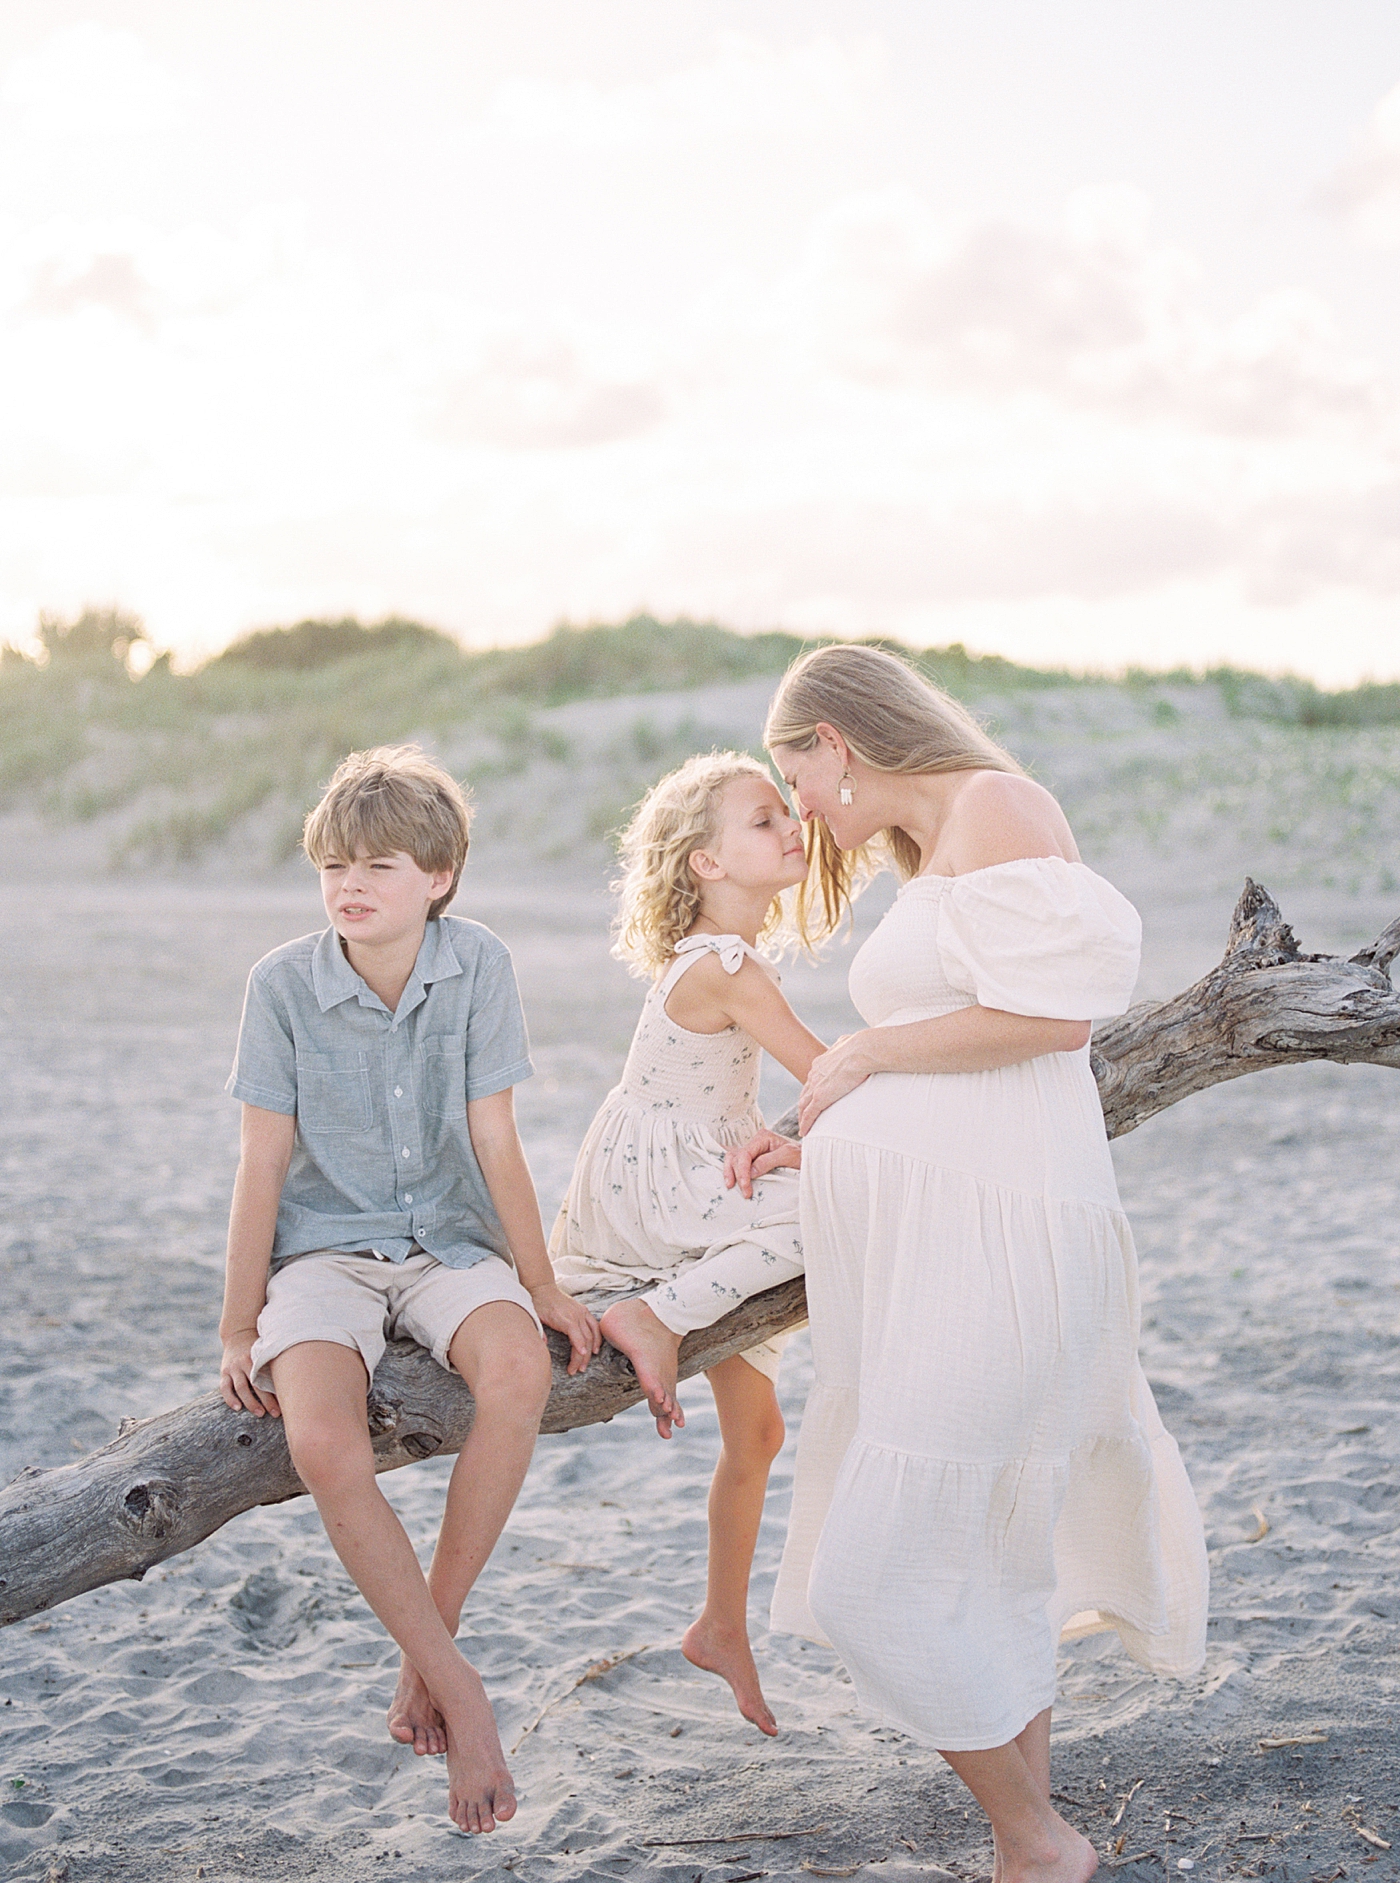 Mom and little kids interacting sitting on a fallen tree at the beach | Image by Caitlyn Motycka